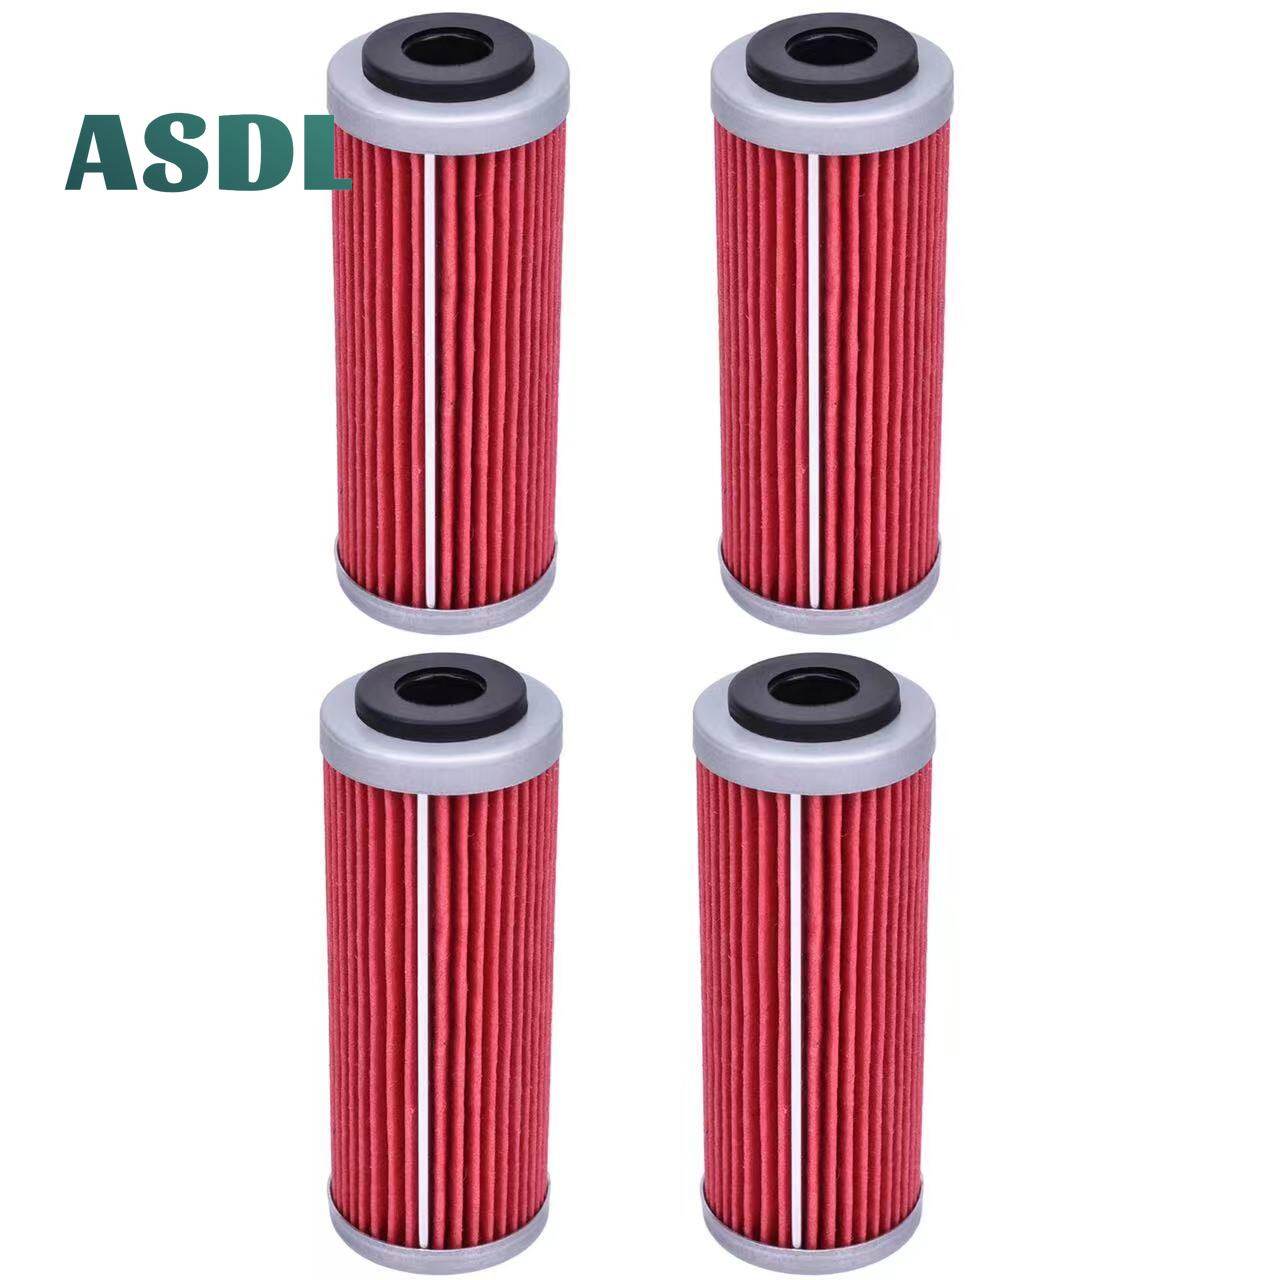 4Pcs Motorcycle Oil Filter for KTM exc xcf-w exc